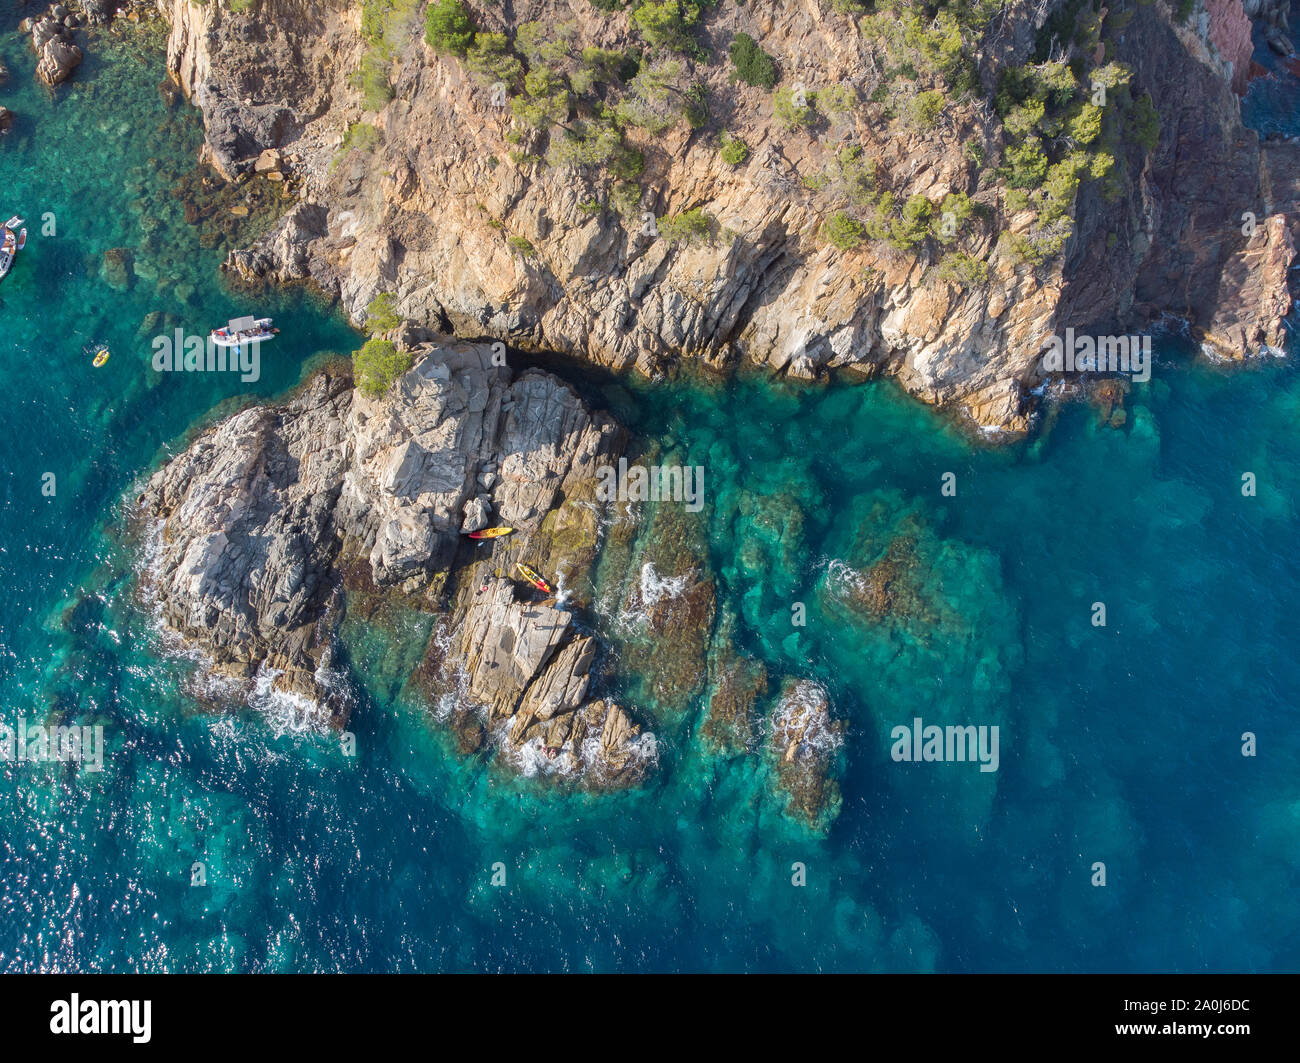 Aerial view of kayaks on a rocky island in the Mediterranean. Stock Photo